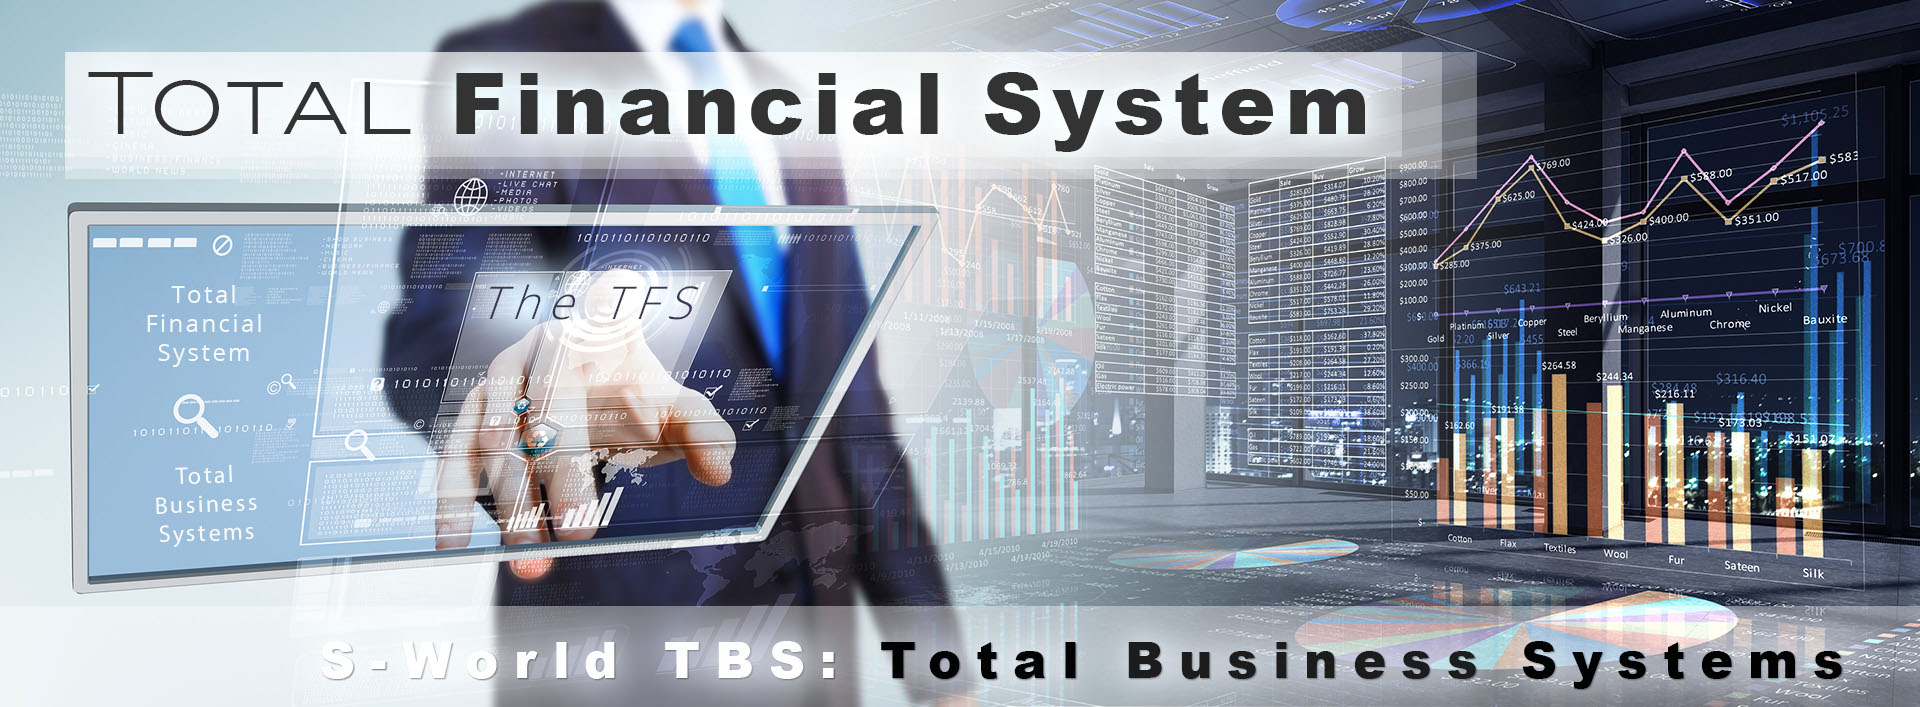 Total-Financial-System-1.02